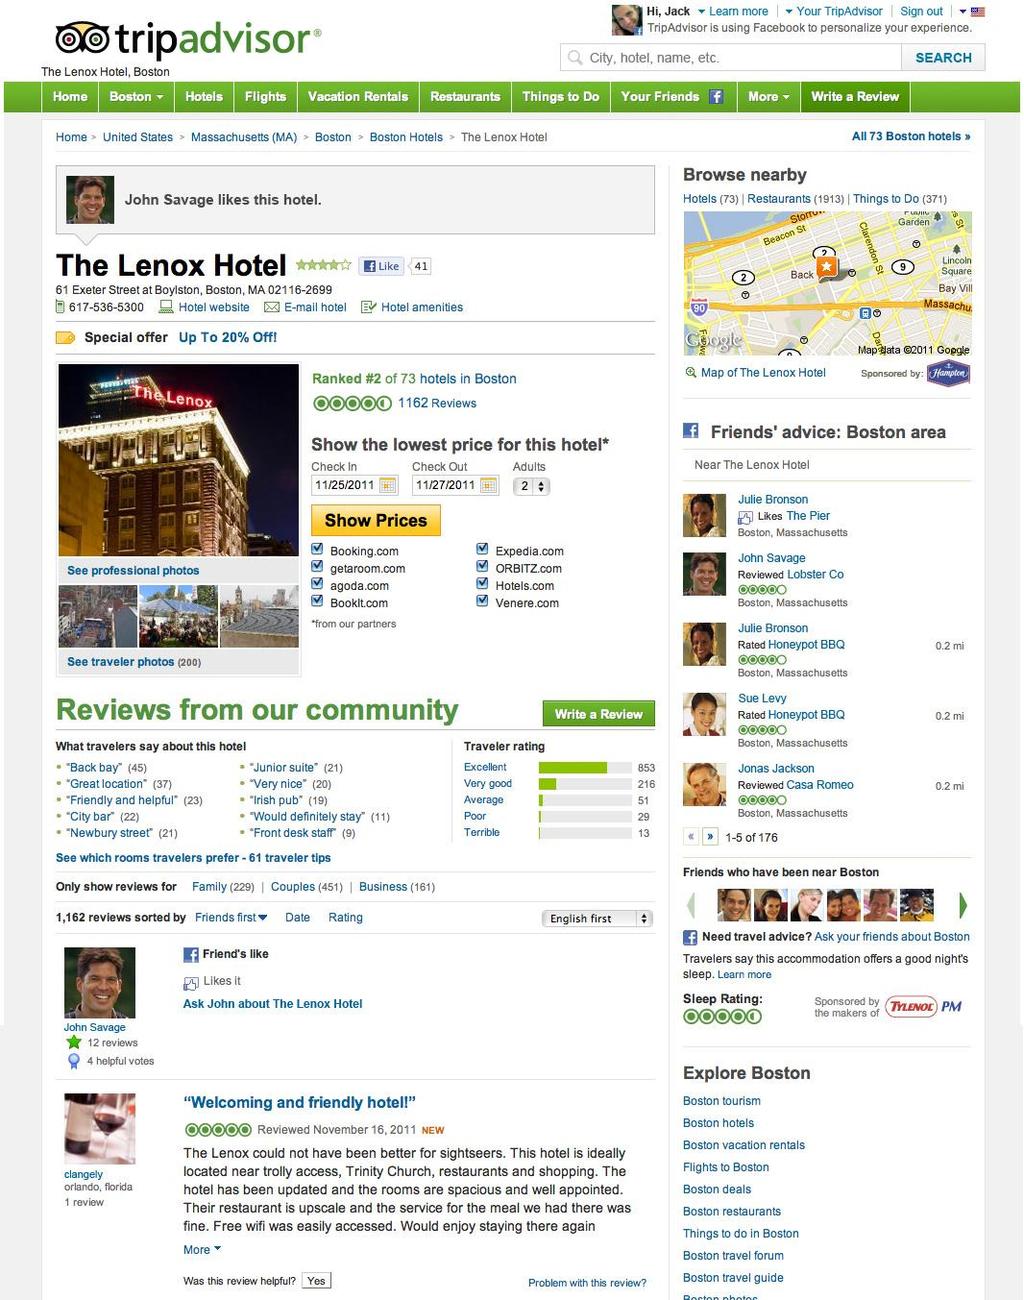 TripAdvisor s Business Model Consumer Value Business Value Facebook friend experiences Candid photos Tips from friends Business listing Display ad /